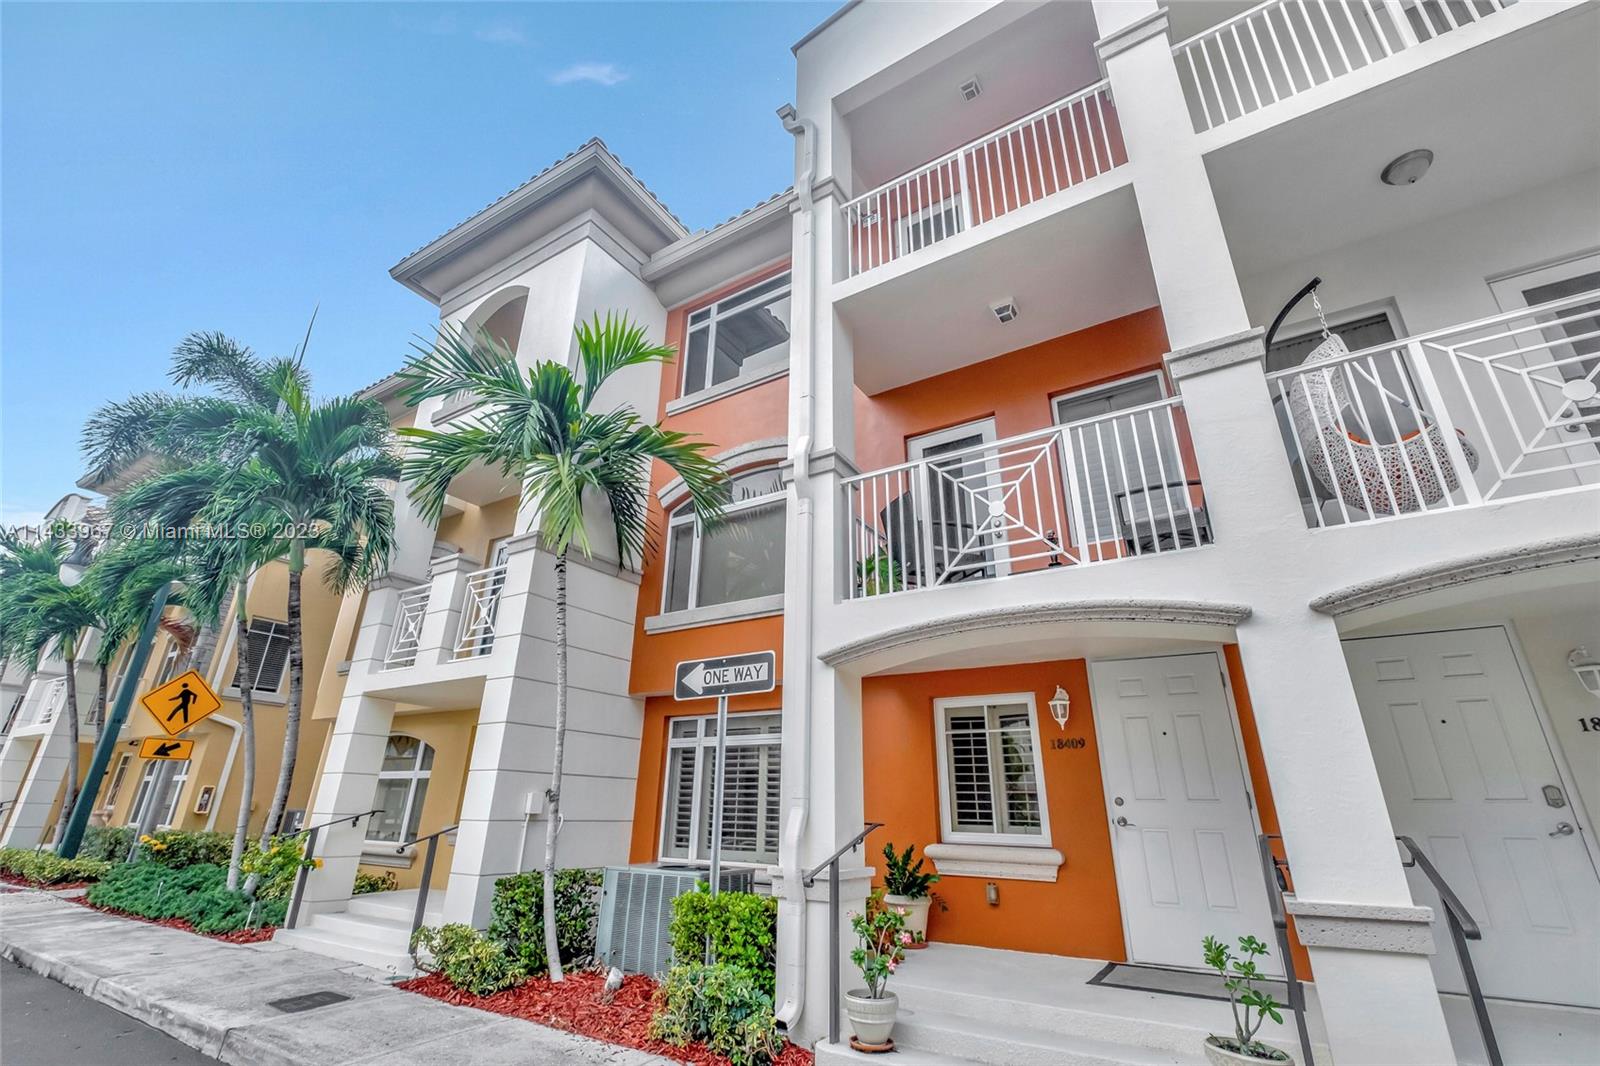 BEAUTIFUL TRI-LEVEL TOWNHOUSE IN BEAUTIFUL AVENTURA.  BRING YOUR PICKEST BUYERS THIS ONE WON'T LAST.  GATED COMMUNITY, DESIRABLE SCHOOLS, SHOPPING MALL AND WALKING DISTANCE TO WORSHIP CENTER.  TONS OF UPGRADES AND STAINLESS APPLIANCES.  MUST SEE TO APPRECIATE.  PLEASE SEE BROKER REMARKS FOR HOA AND SHOWING INSTRUCTIONS.